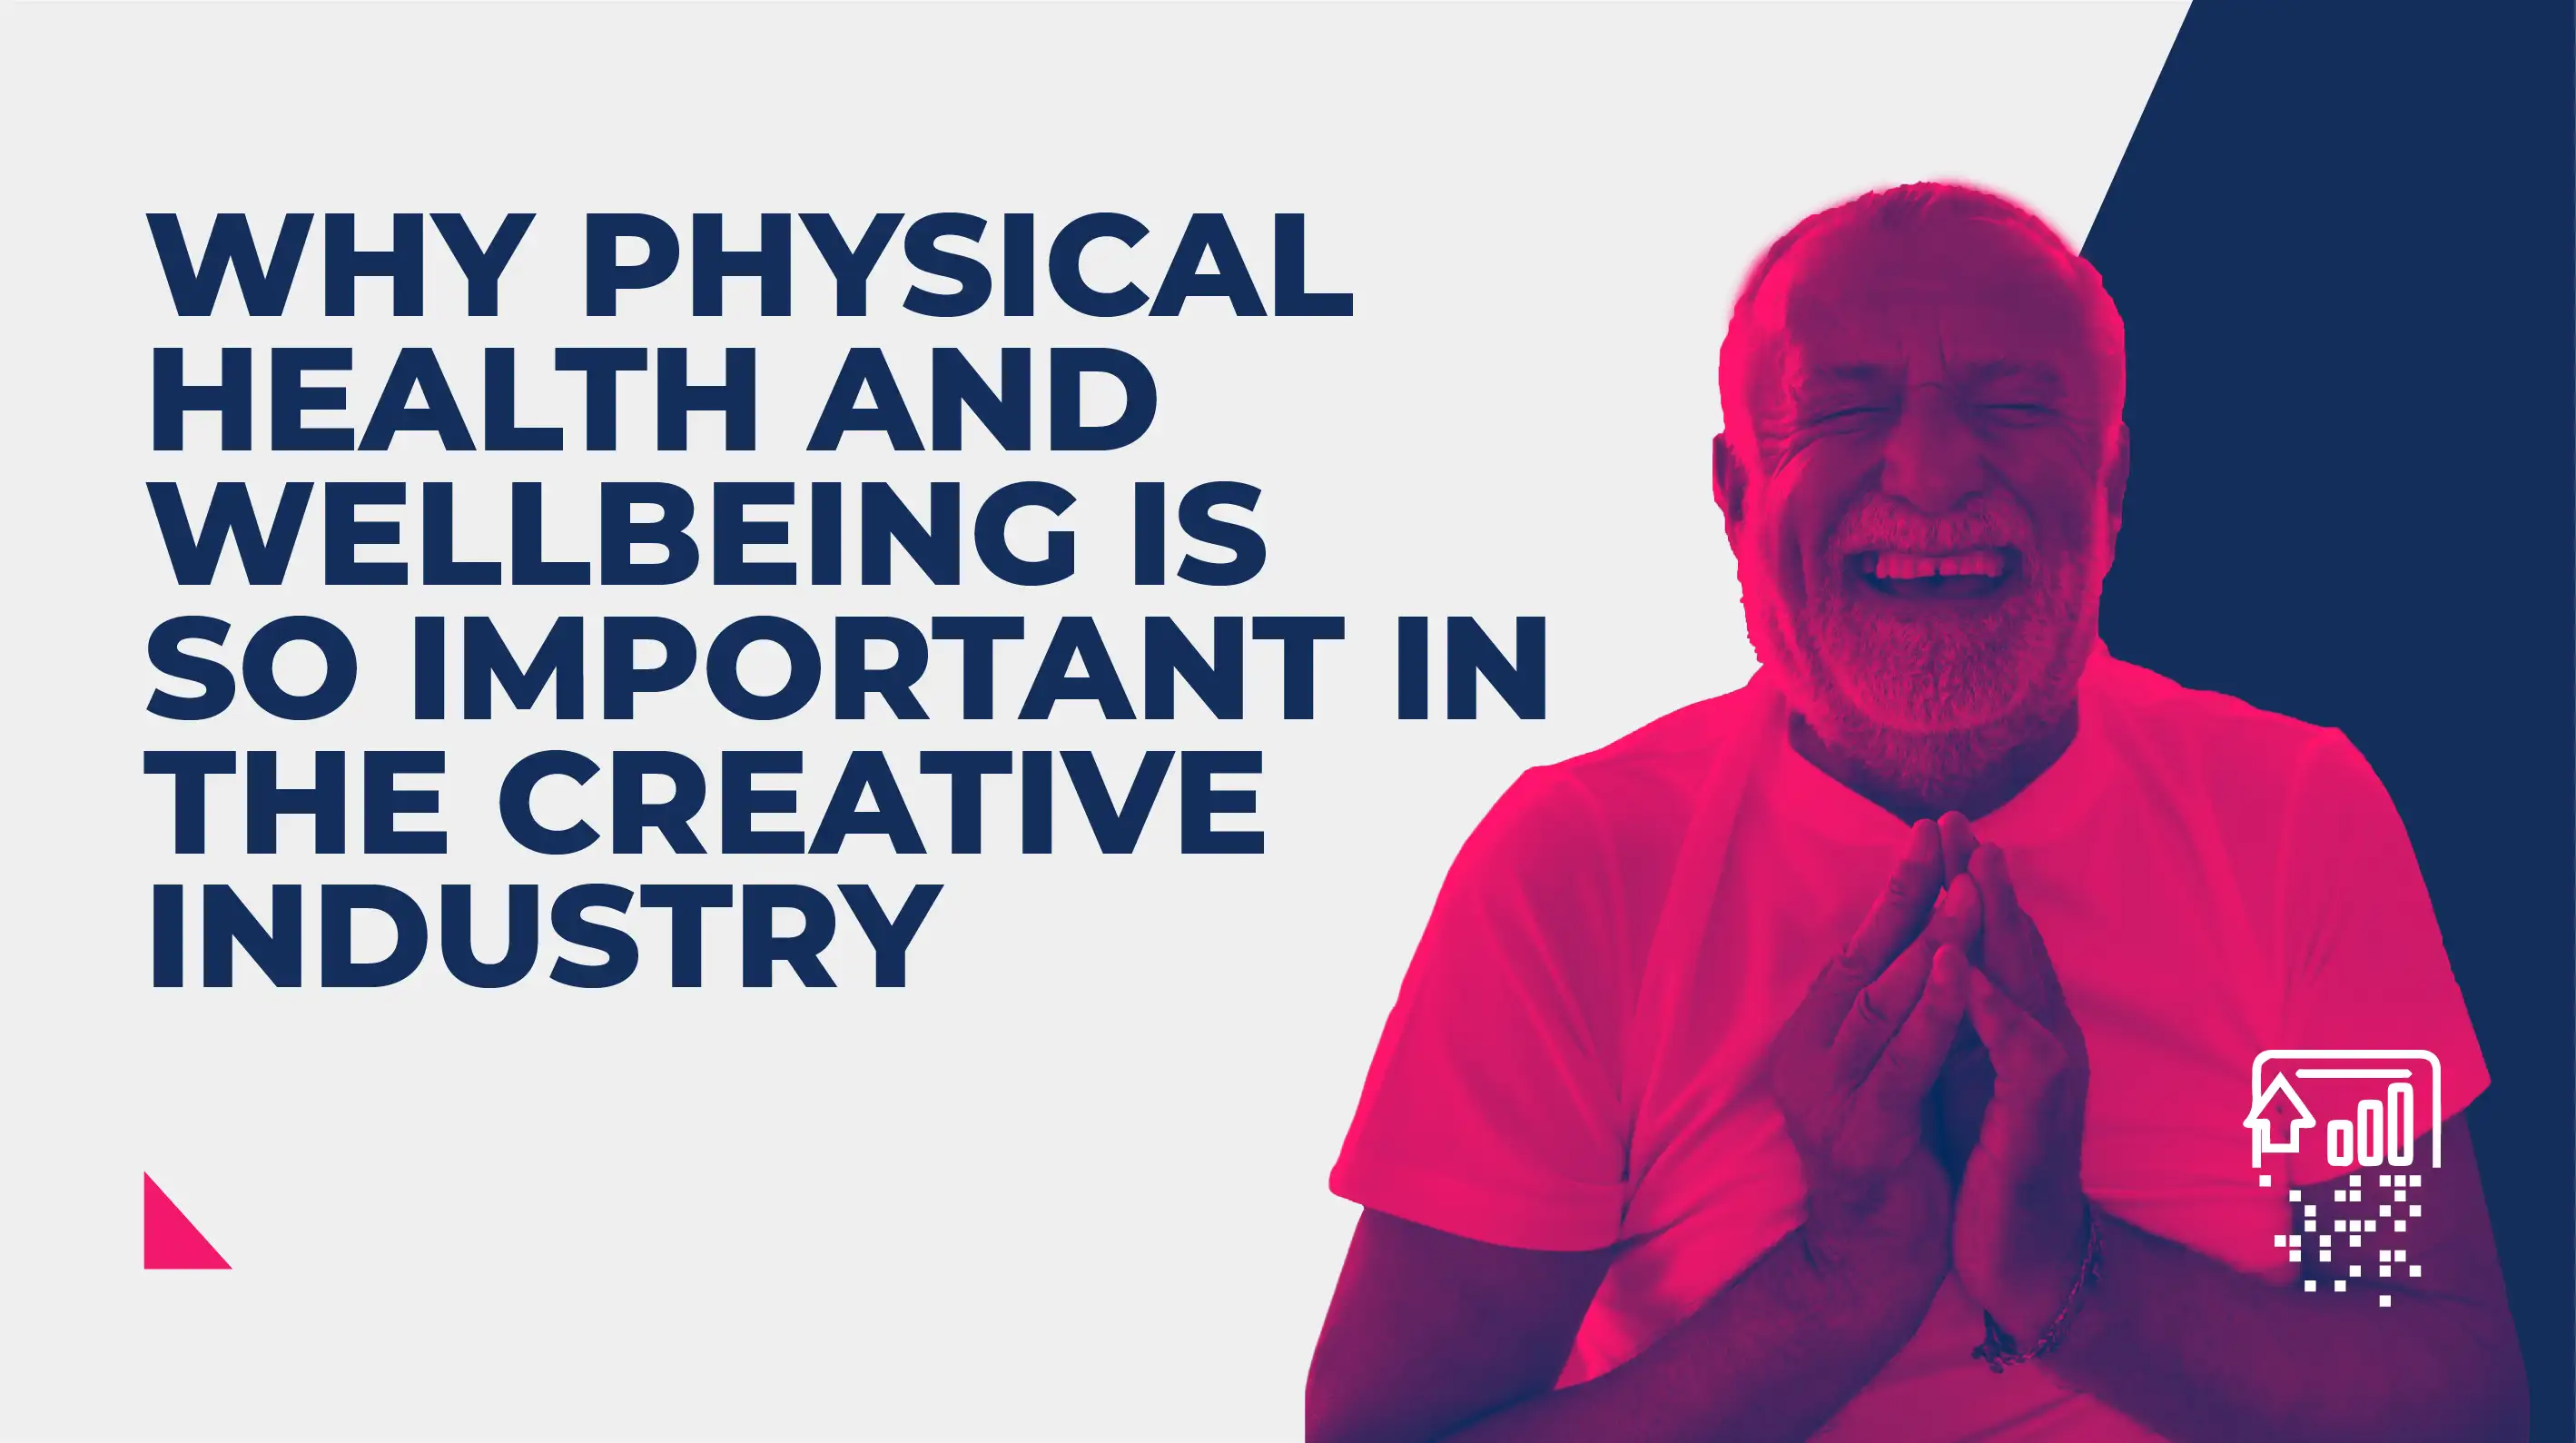 Why Physical Health is So Important in the Creative Industry